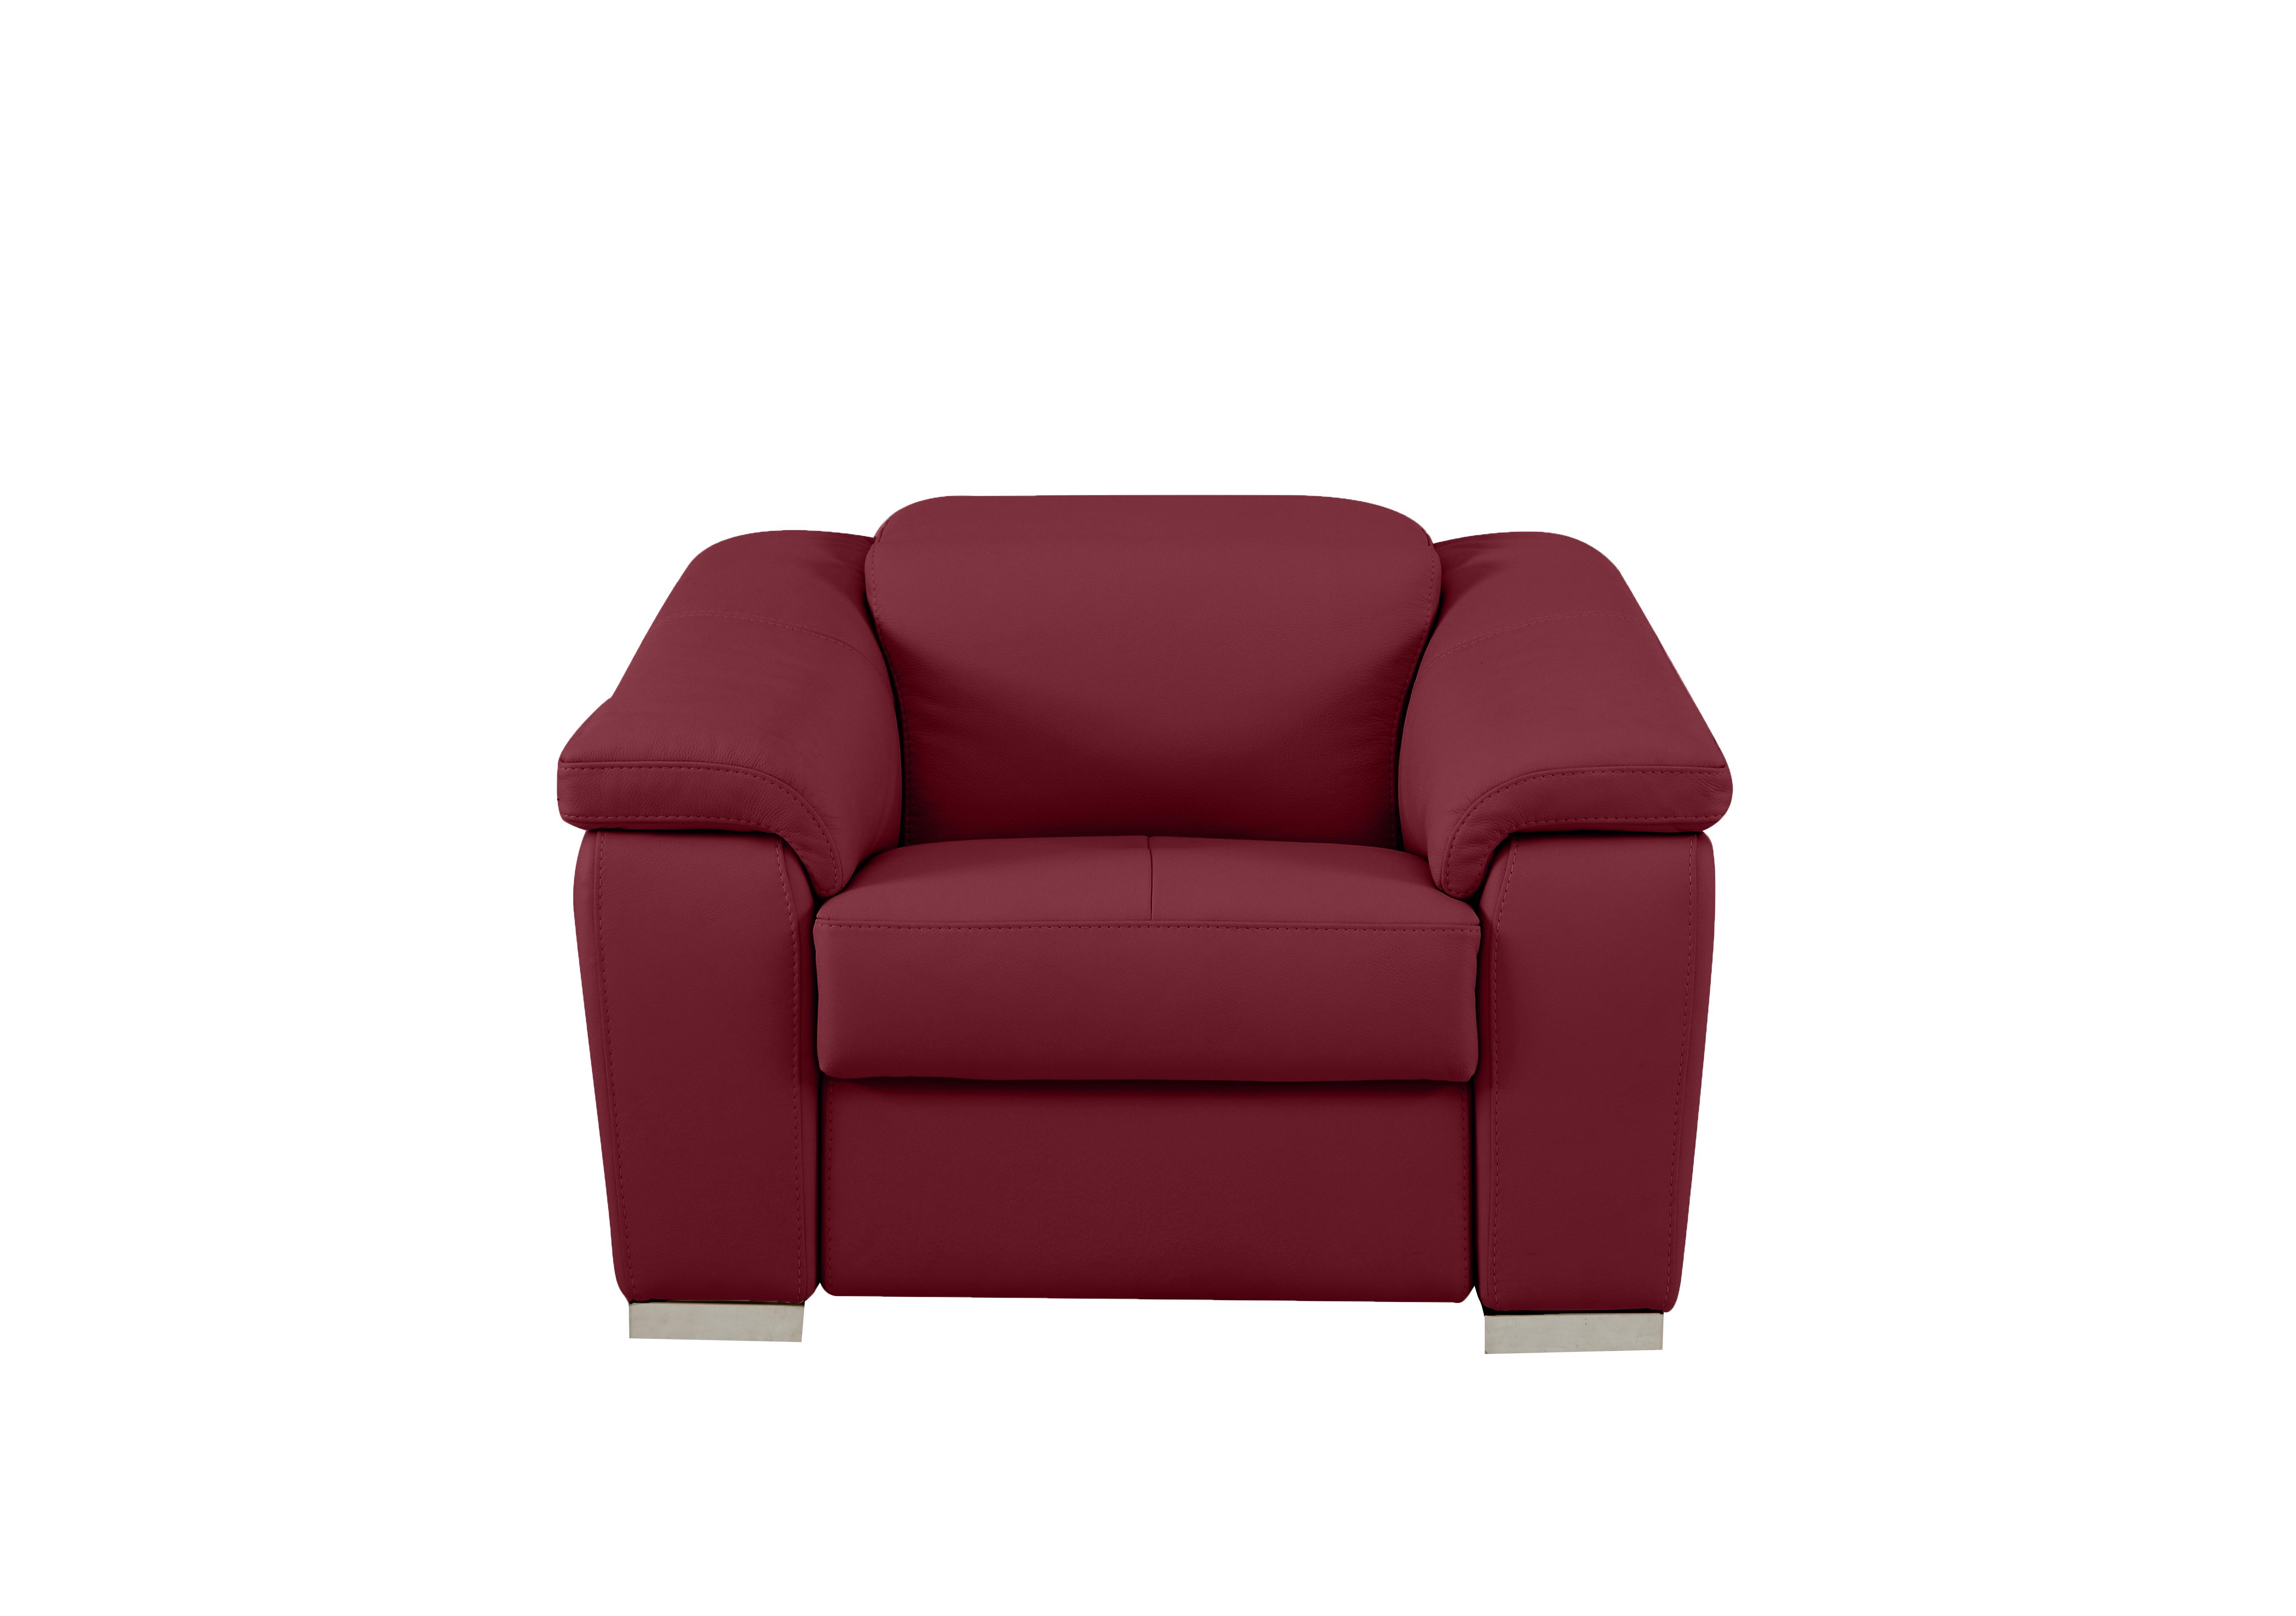 Galileo Leather Armchair in Dali Bordeaux 1521 Ch on Furniture Village